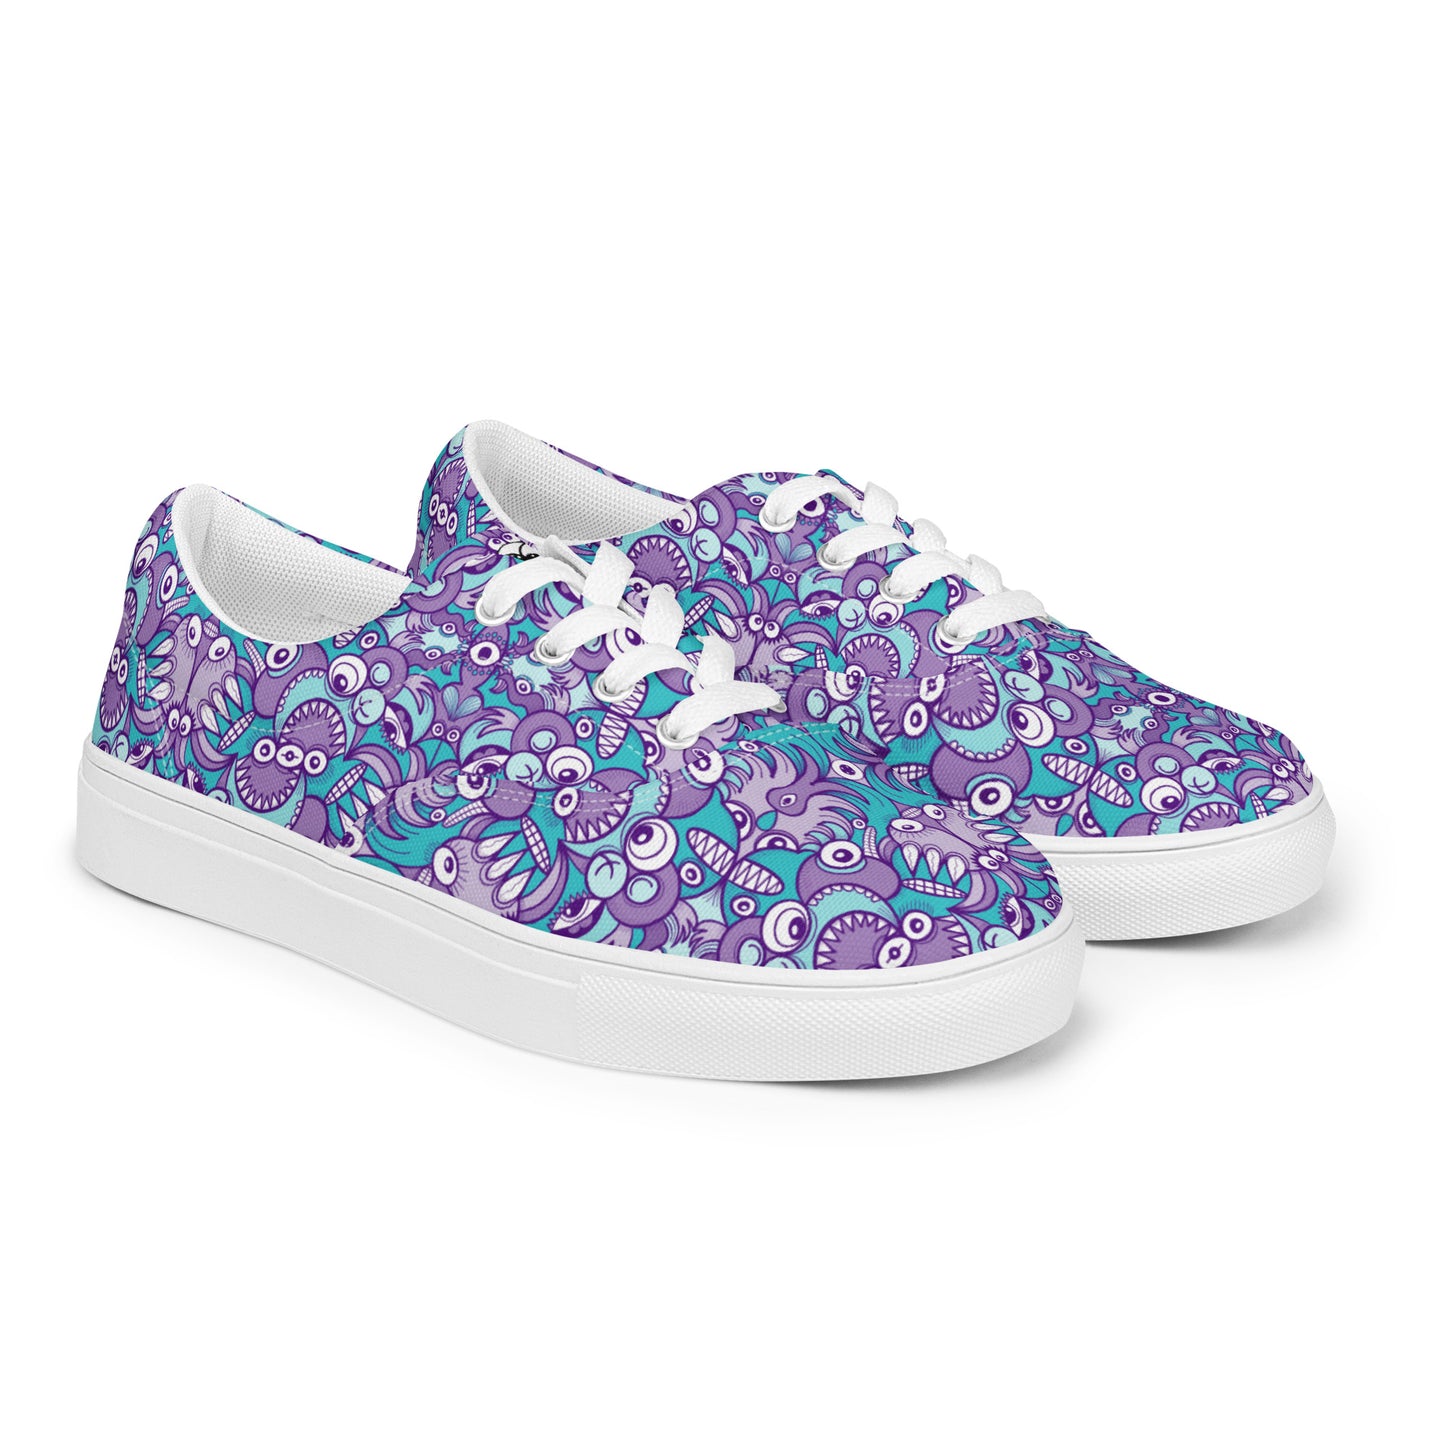 Planet 5: Aquatic Creatures from the Doodles of the Galaxy - Women’s lace-up canvas shoes. Overview